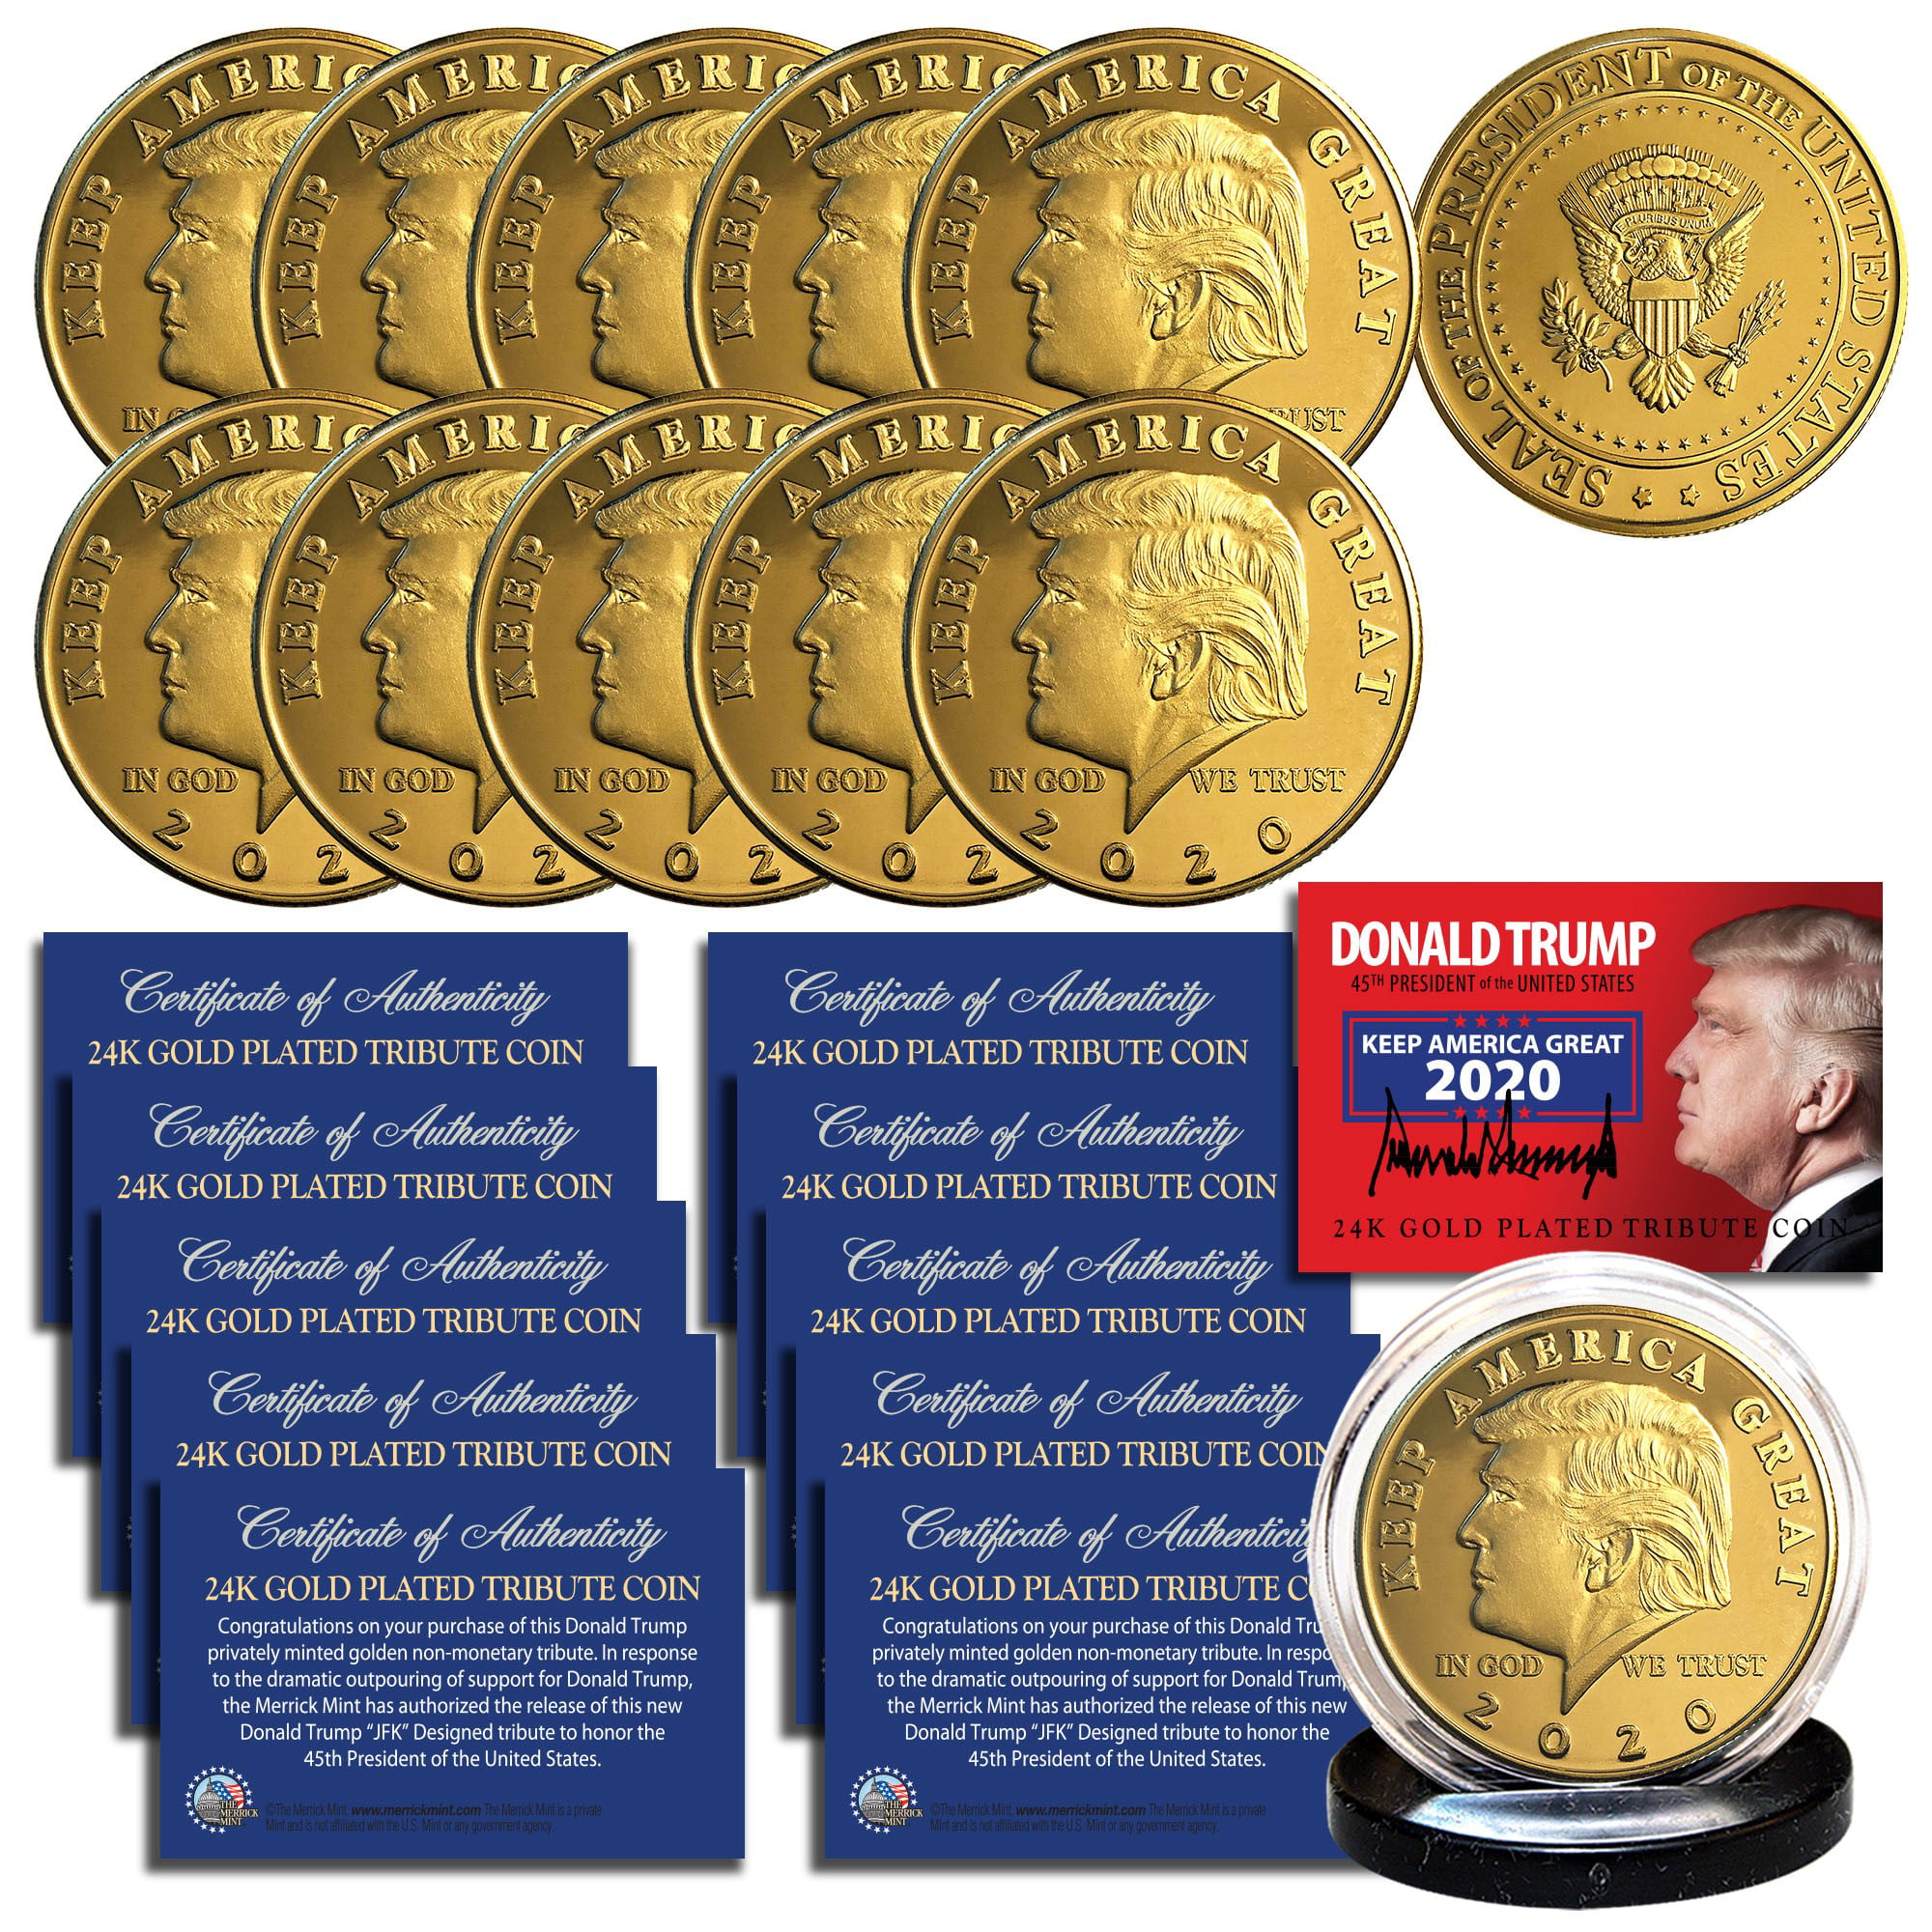 US President Donald Trump 2020 KEEP AMERICA GREAT Silver&Gold Eagle Coin GIFT sm 